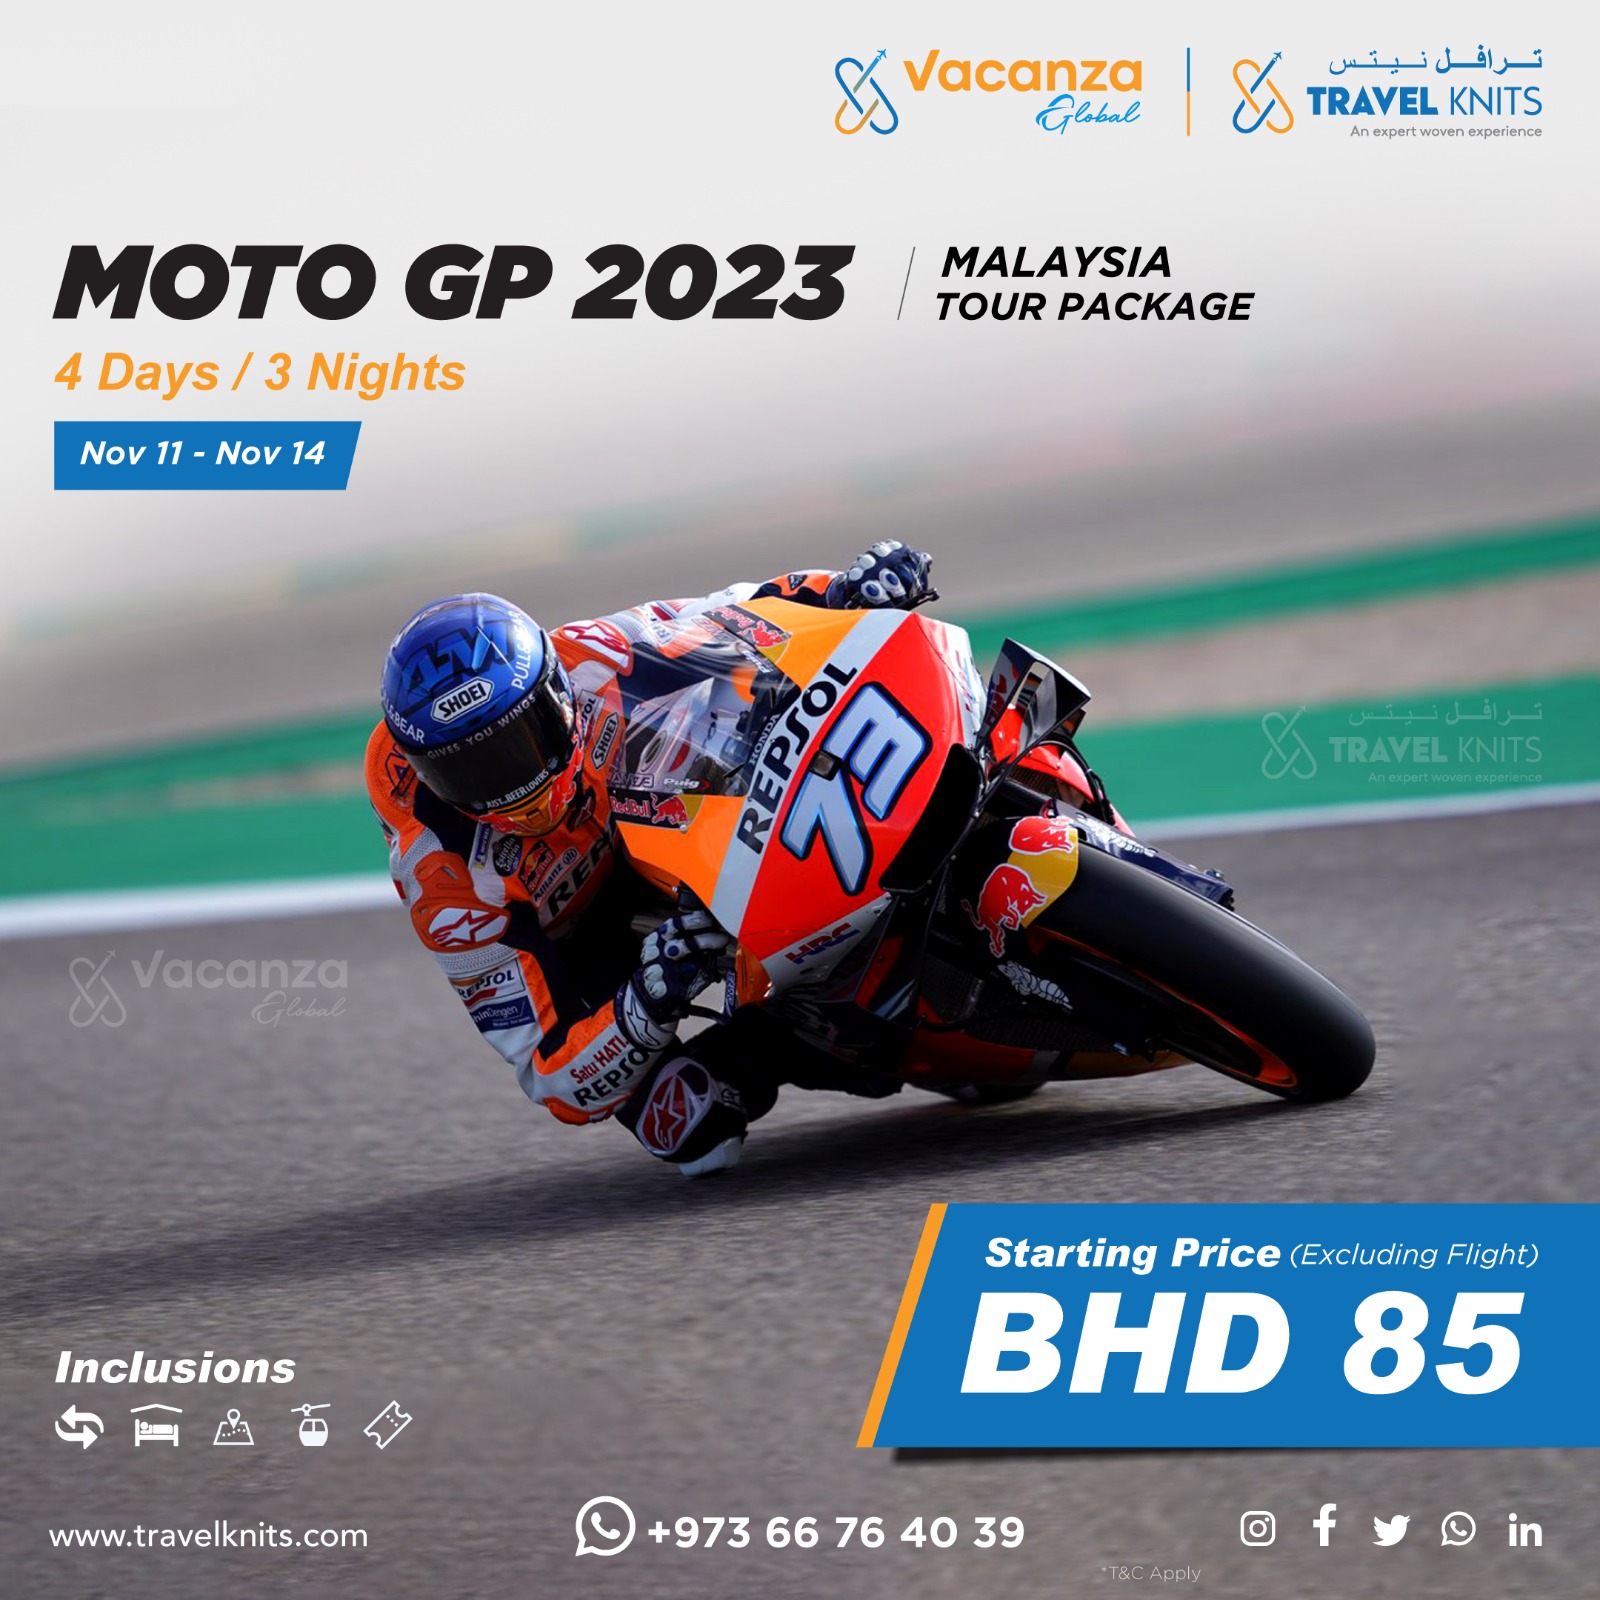 MOTO GP 2023|MalaysiaTour Packages - Book honeymoon ,family,adventure tour packages to Malaysia|Travel Knits												